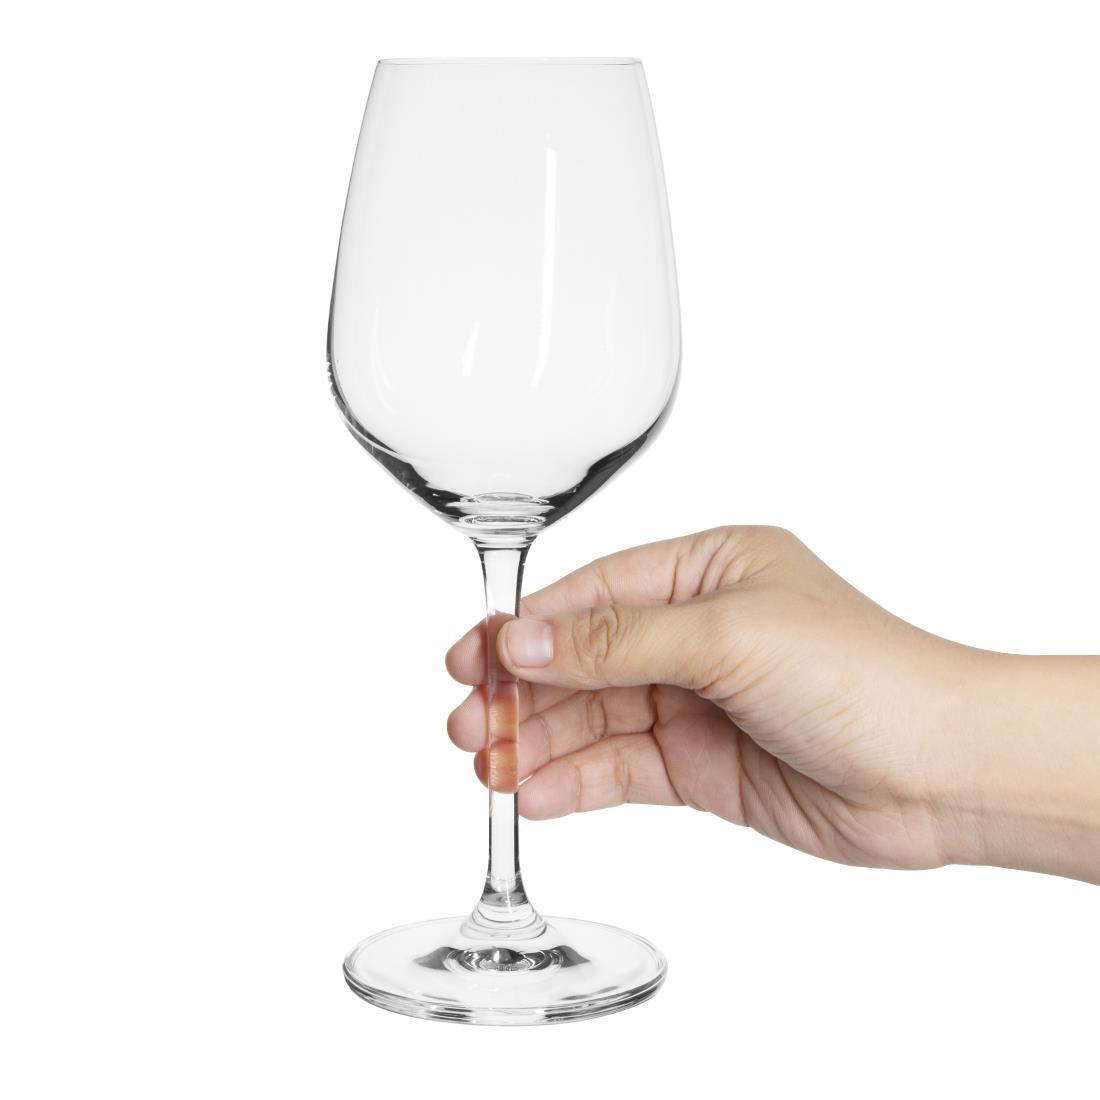 Olympia Chime Crystal Wine Glasses 365ml (Pack of 6) - GF733  - 2